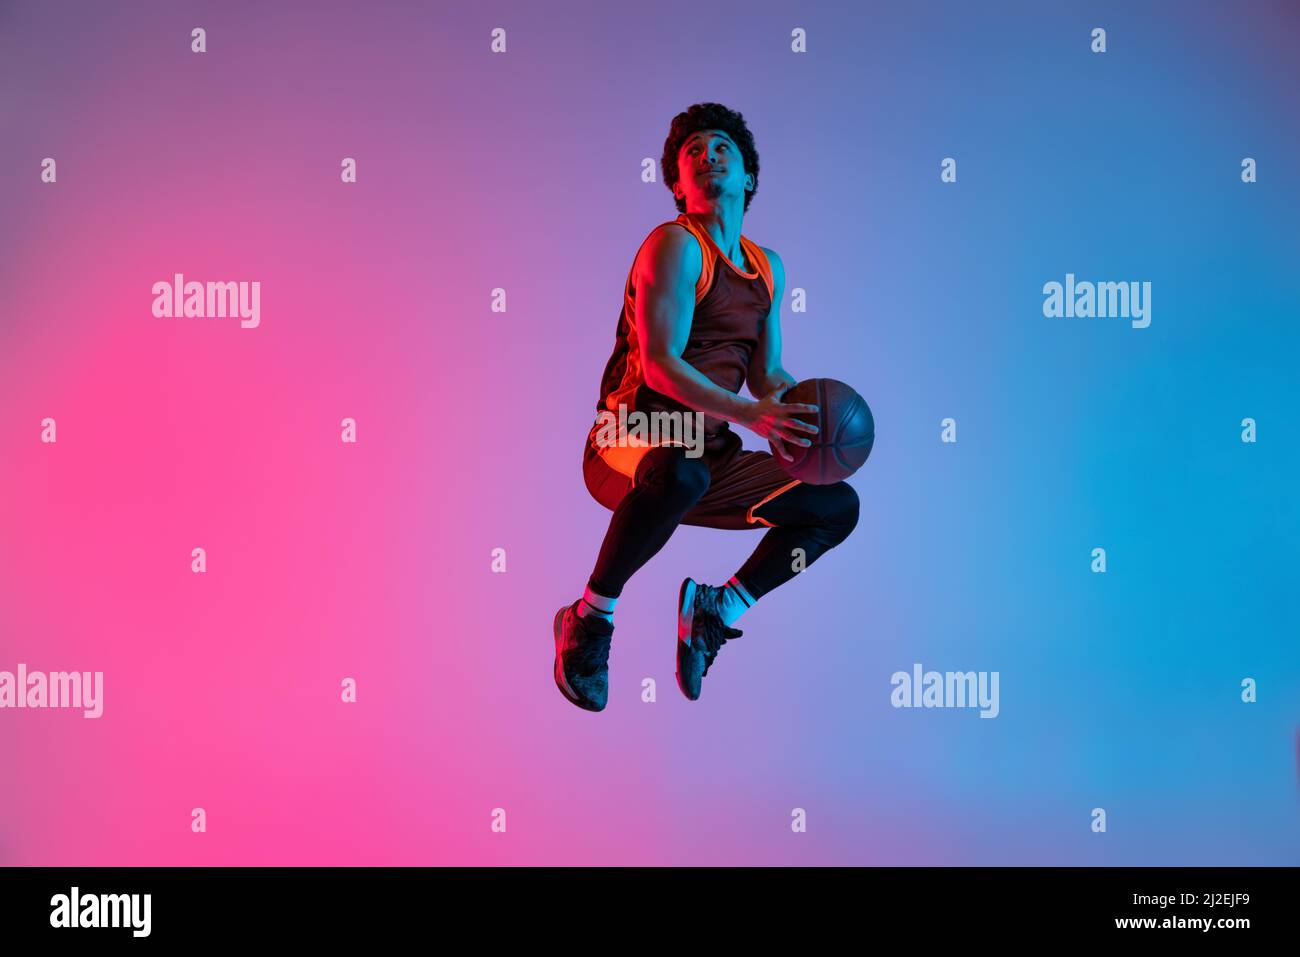 An energetic young man playing basketball Stock Vector by ©interactimages  46122663